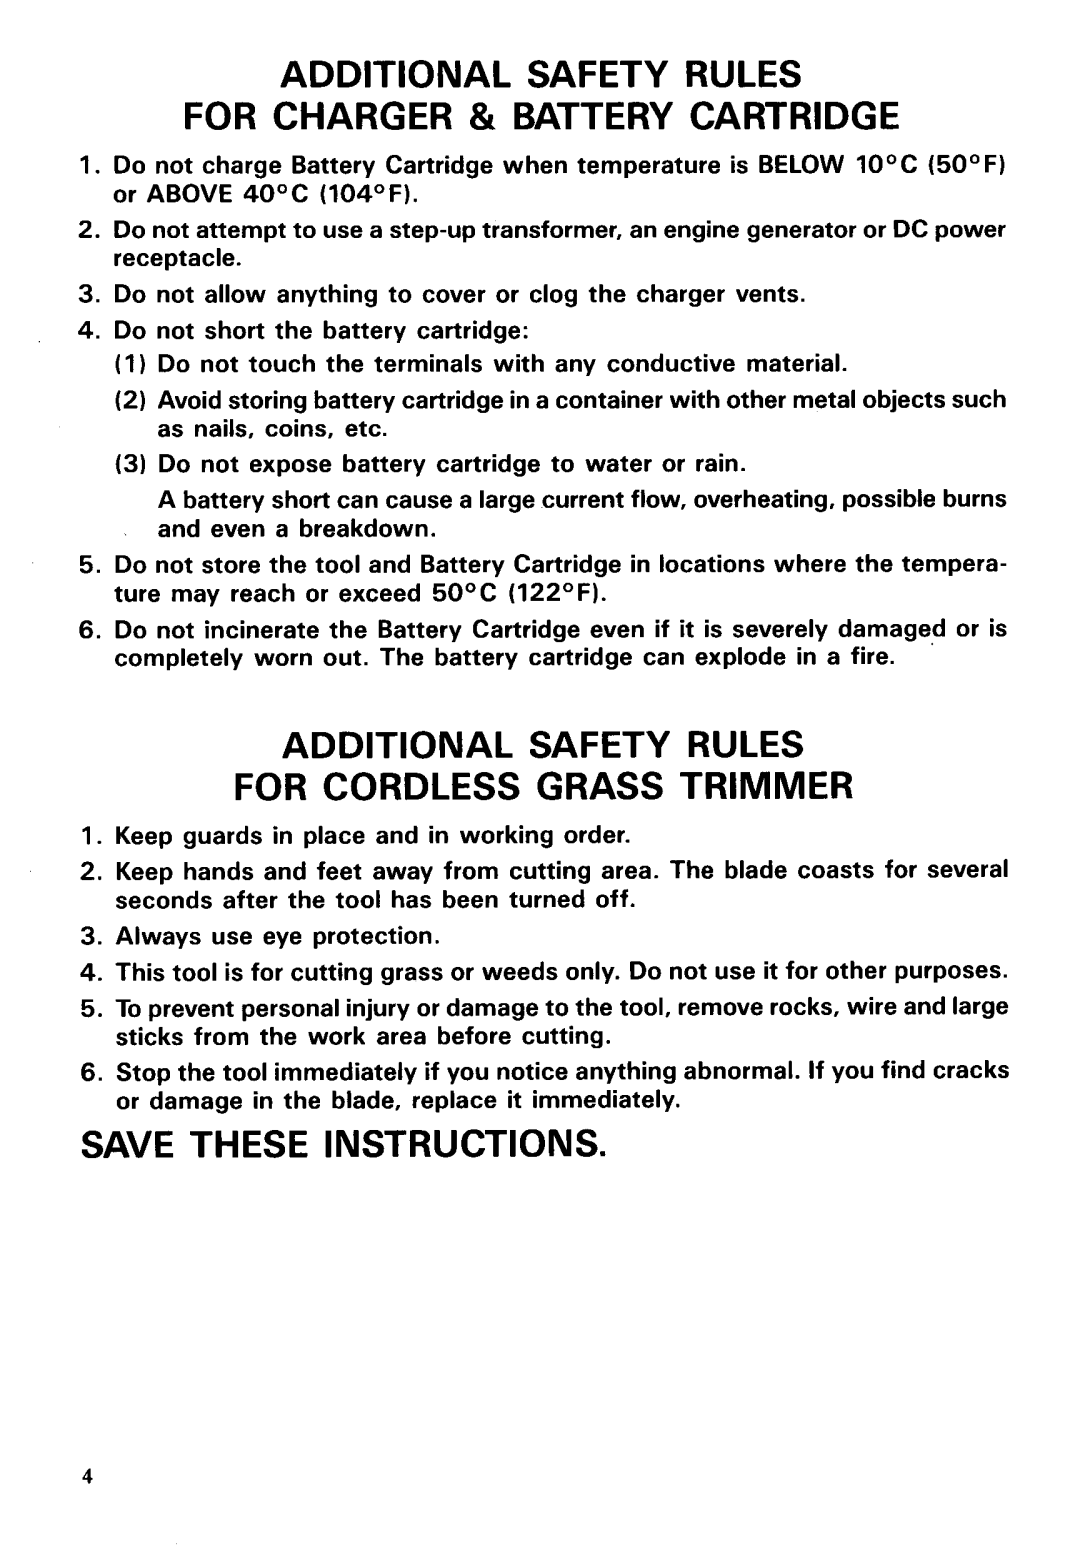 Makita UML2OOD Additional Safety Rules For Charger & Battery Cartridge, Additional Safety Rules For Cordless Grass Trimmer 